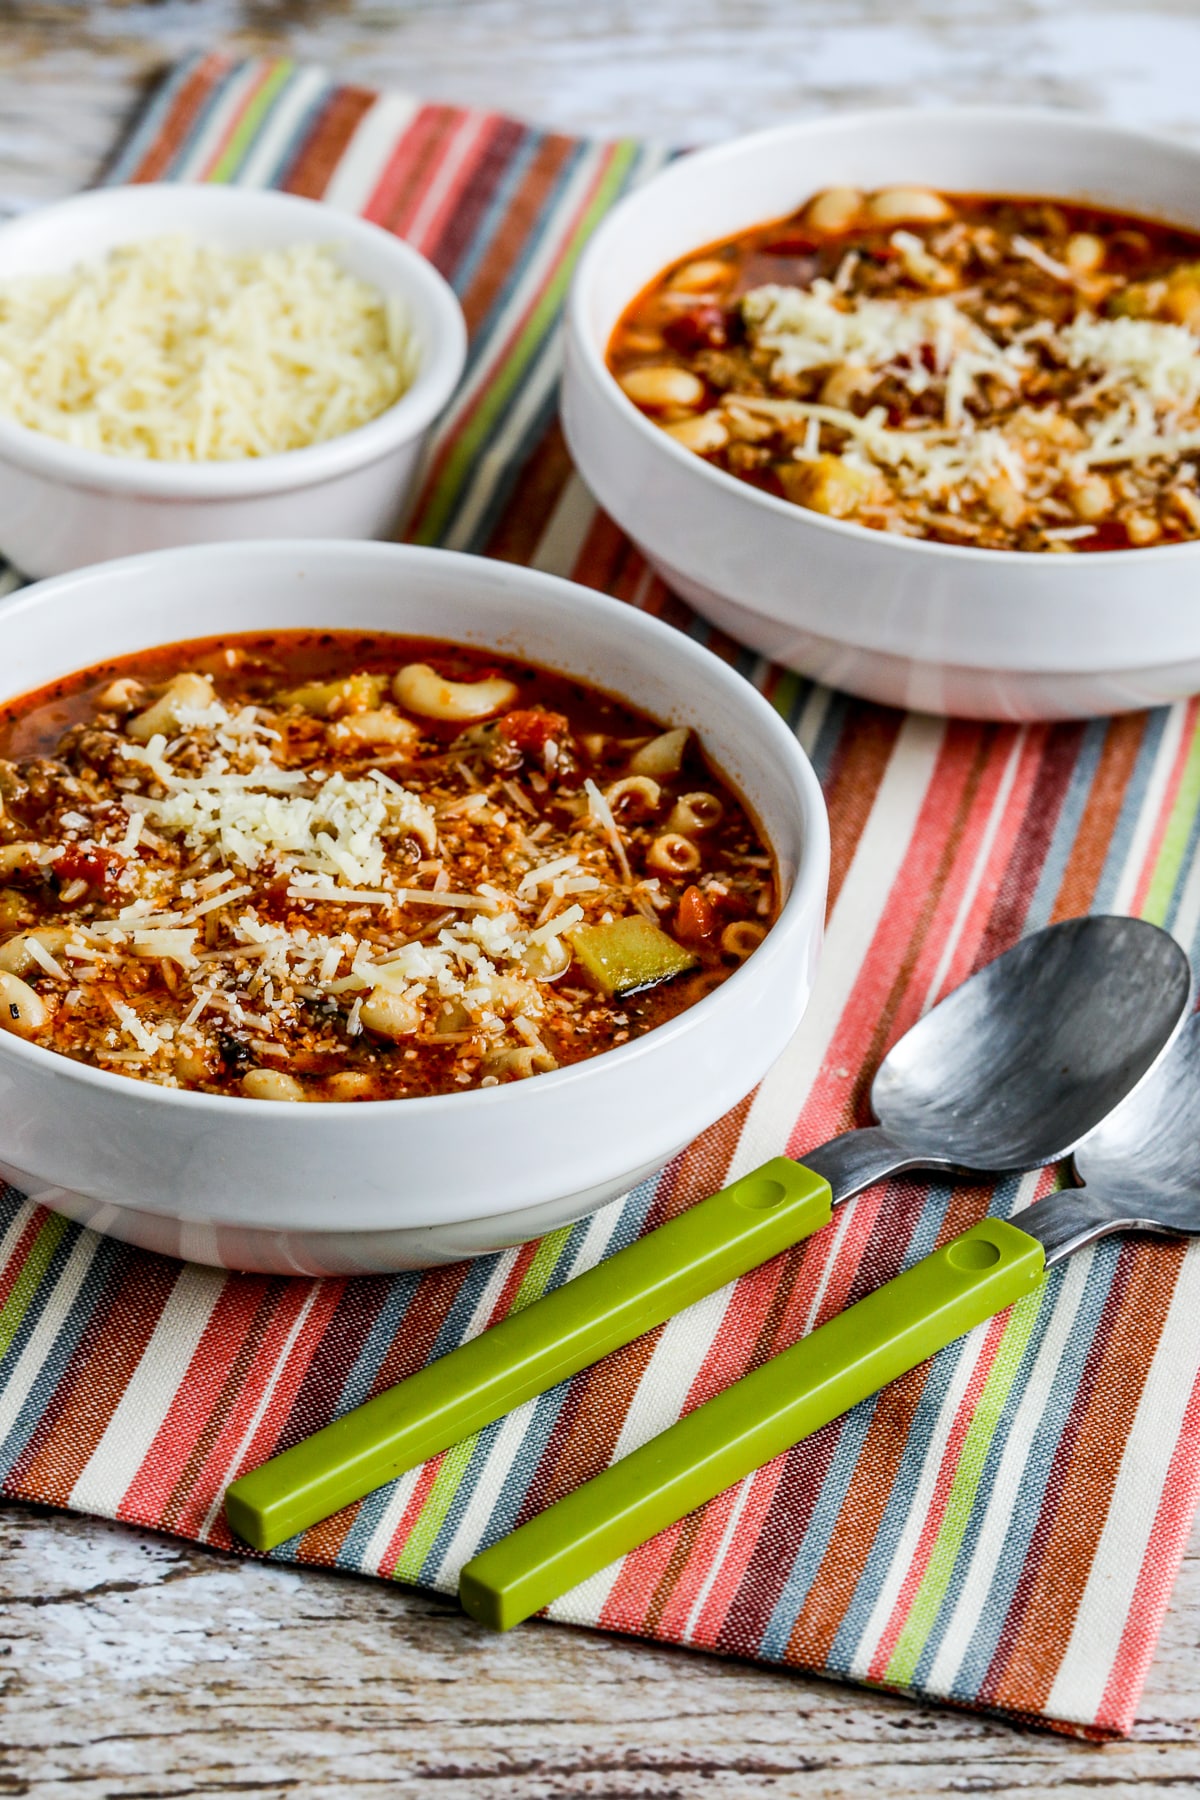 Farther back photo of Italian Sausage, Zucchini, and Macaroni Soup shown in two bowls with spoons and Parmesan